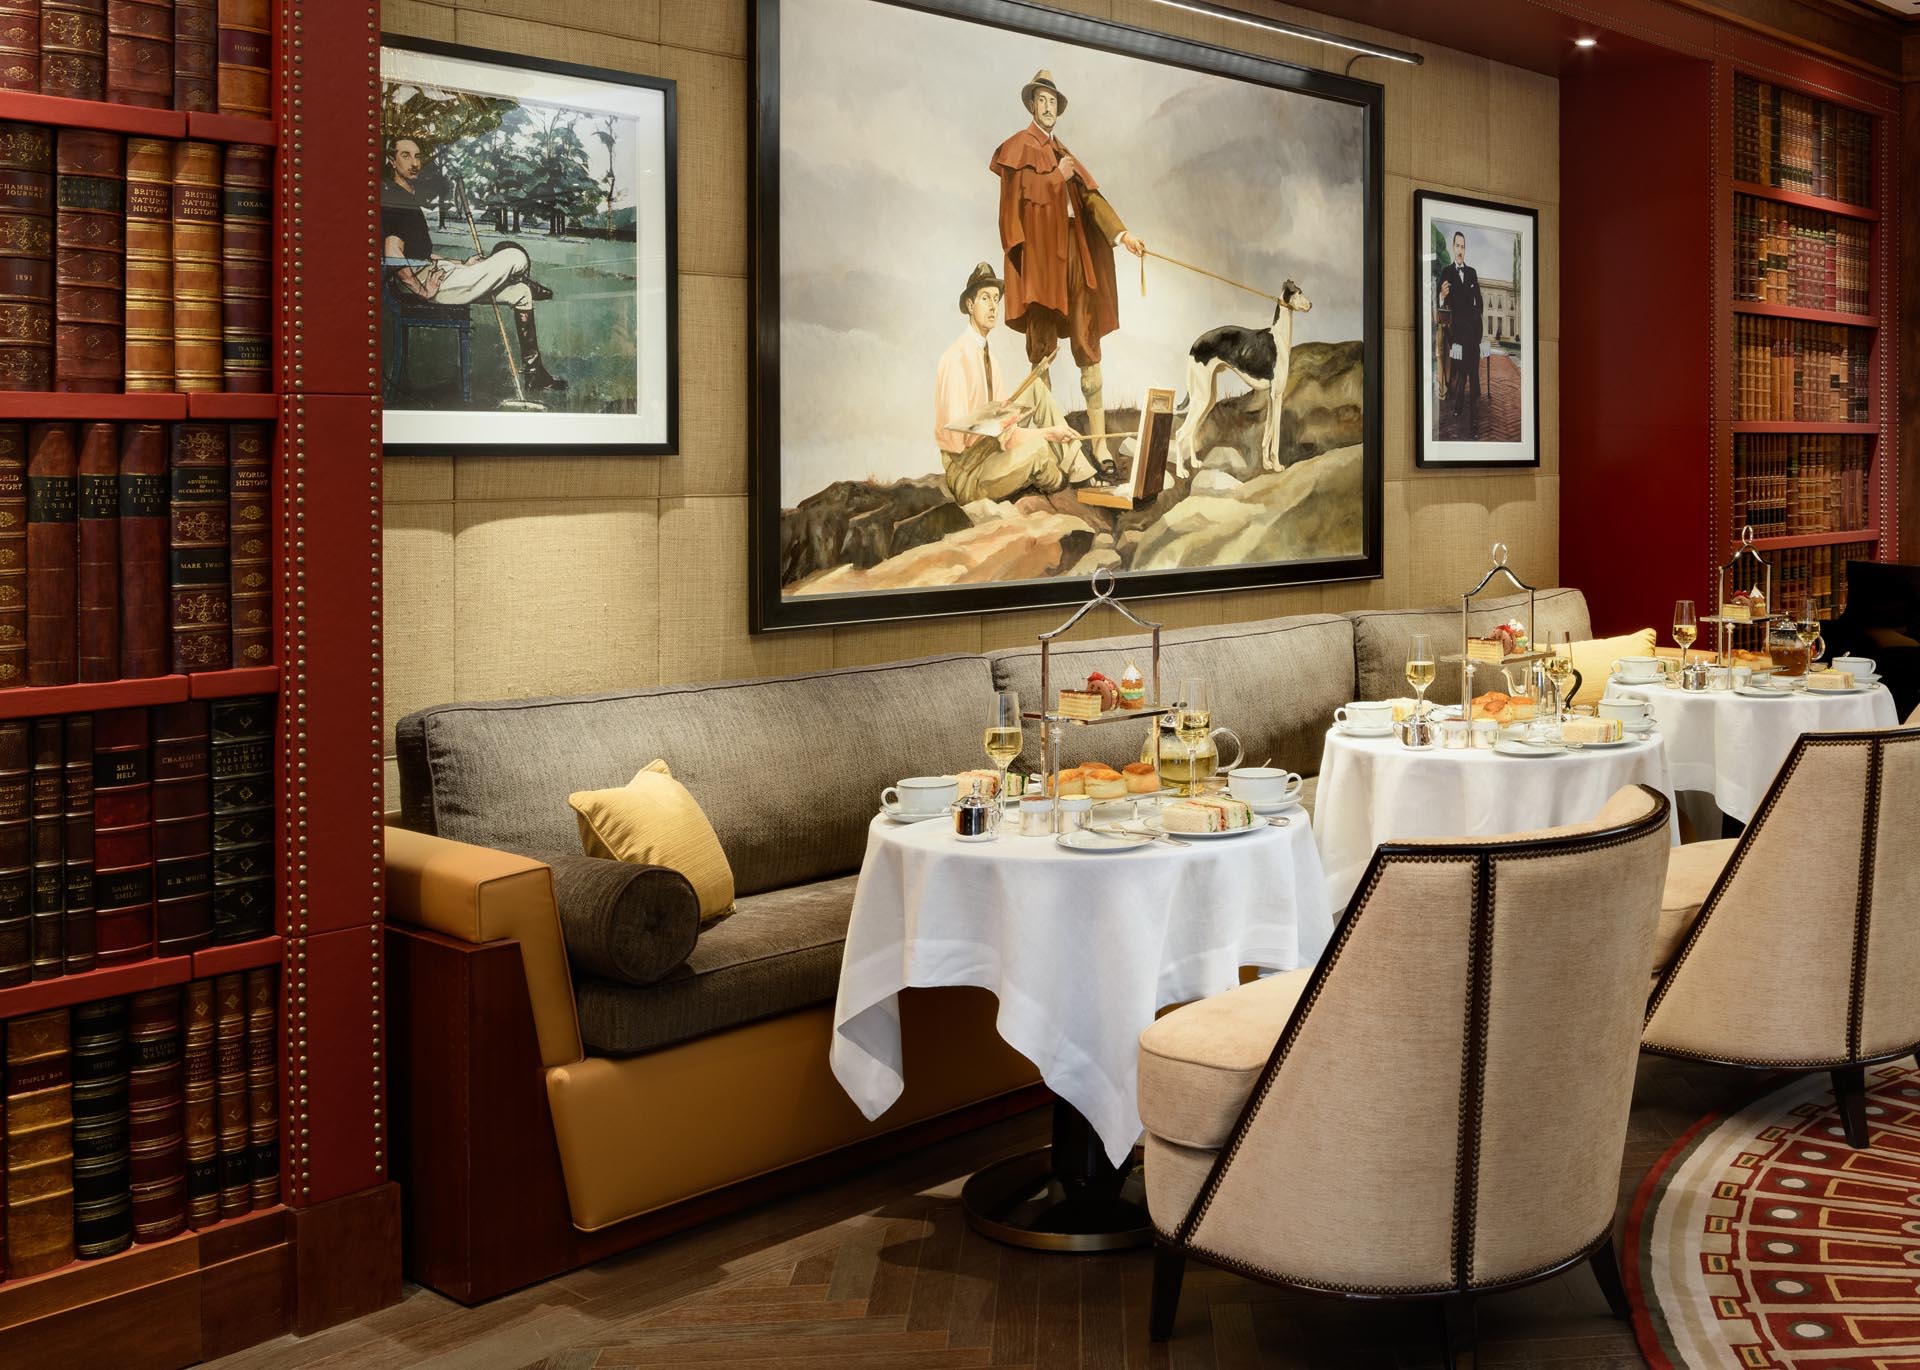 The Beaumont Hotel: afternoon tea and a room inside the sculpture